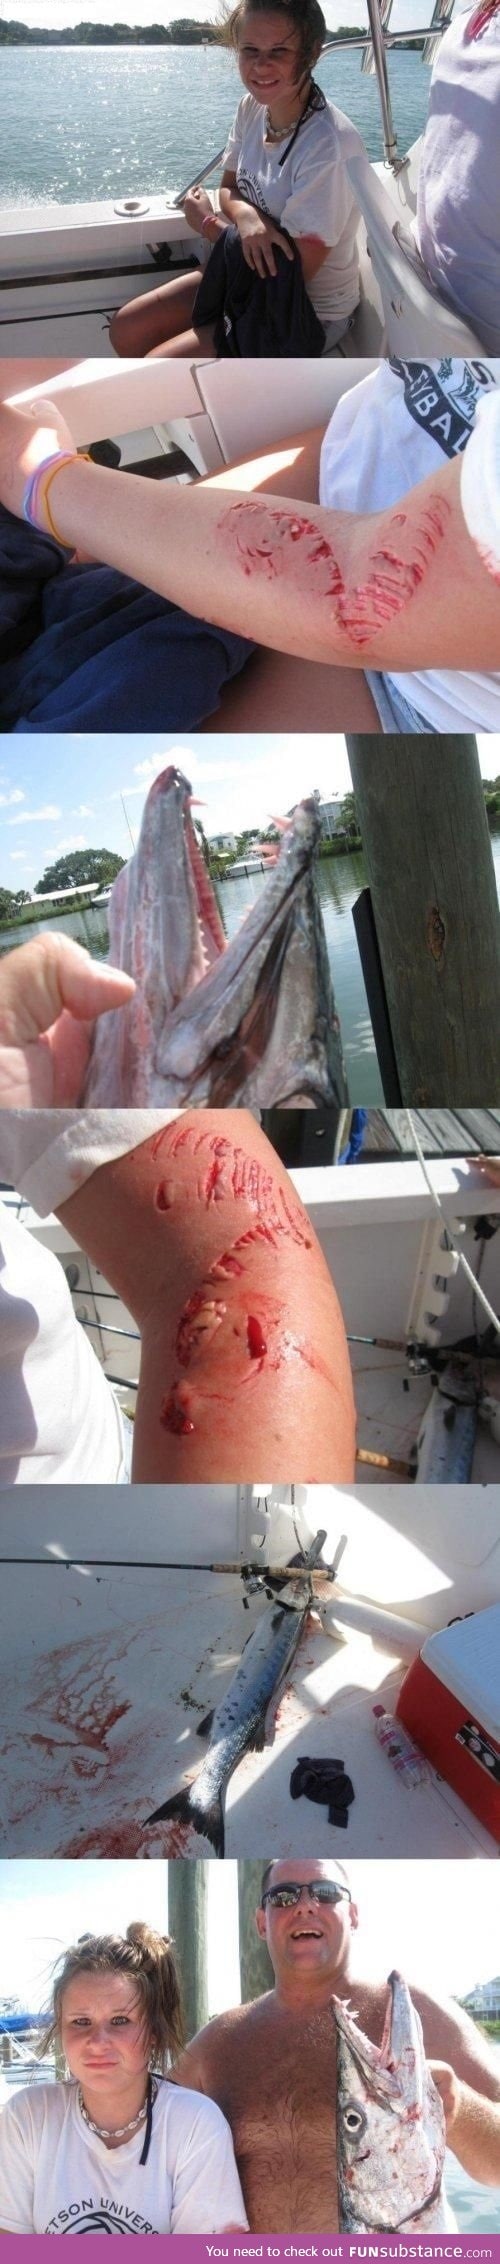 Go fishing with dad they said